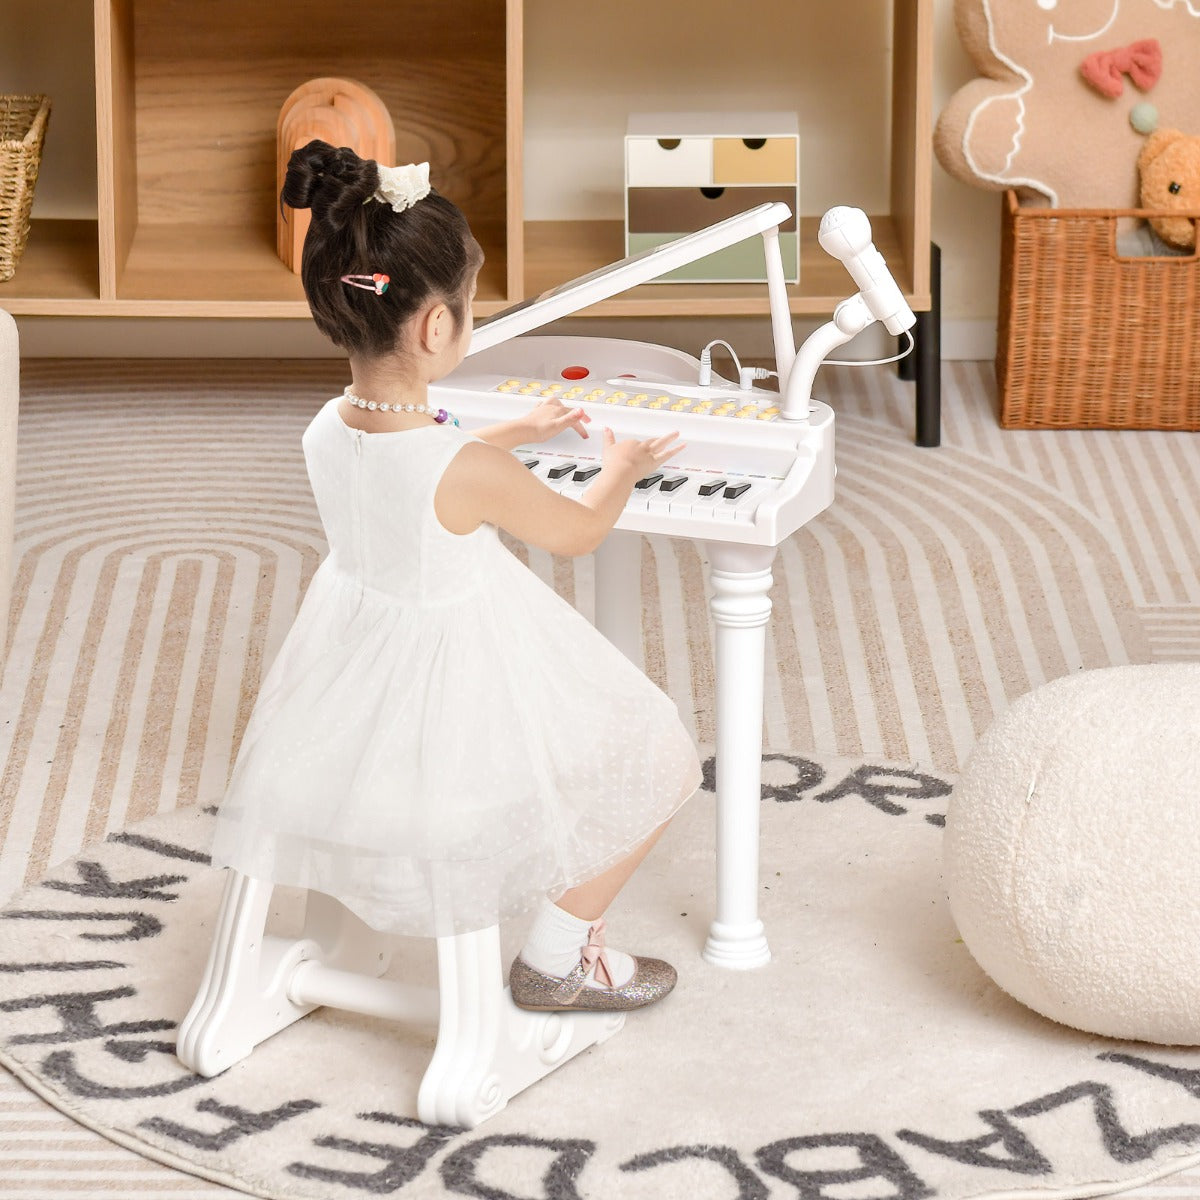 31 Keys Kids Piano Keyboard with Stool and Microphone for Kids White